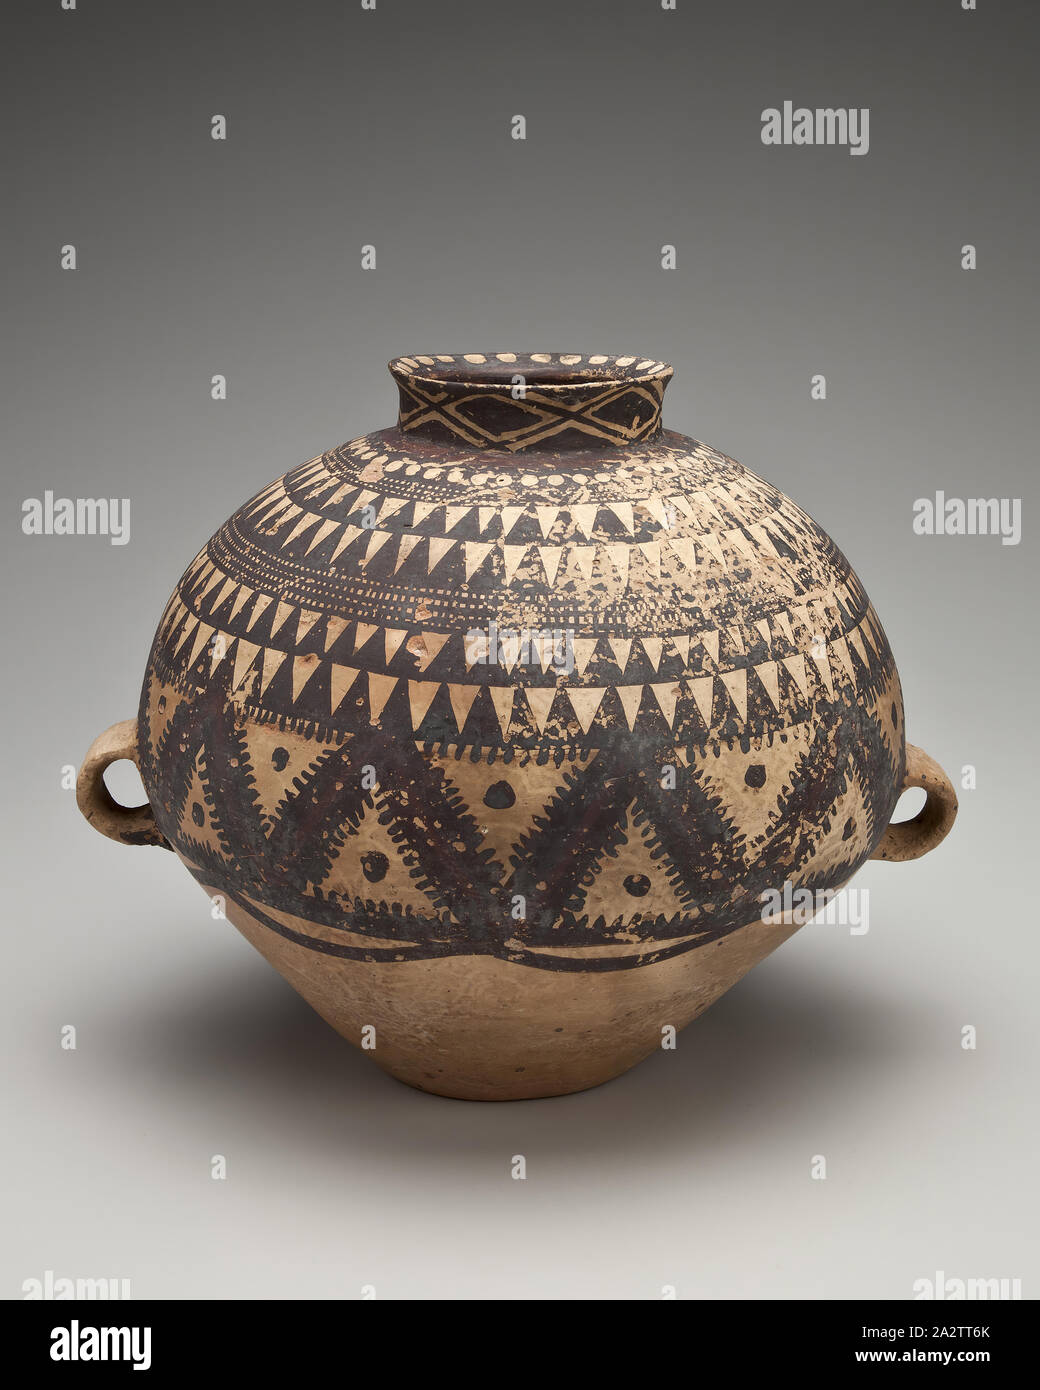 storage jar with triangle bands, chevron and dot design, Neolithic, Neolithic, pre-4th century B.C.E., partially burnished earthenware and paint, 8-5/8 x 11-1/4 x 9-1/2 in., Asian Art Stock Photo